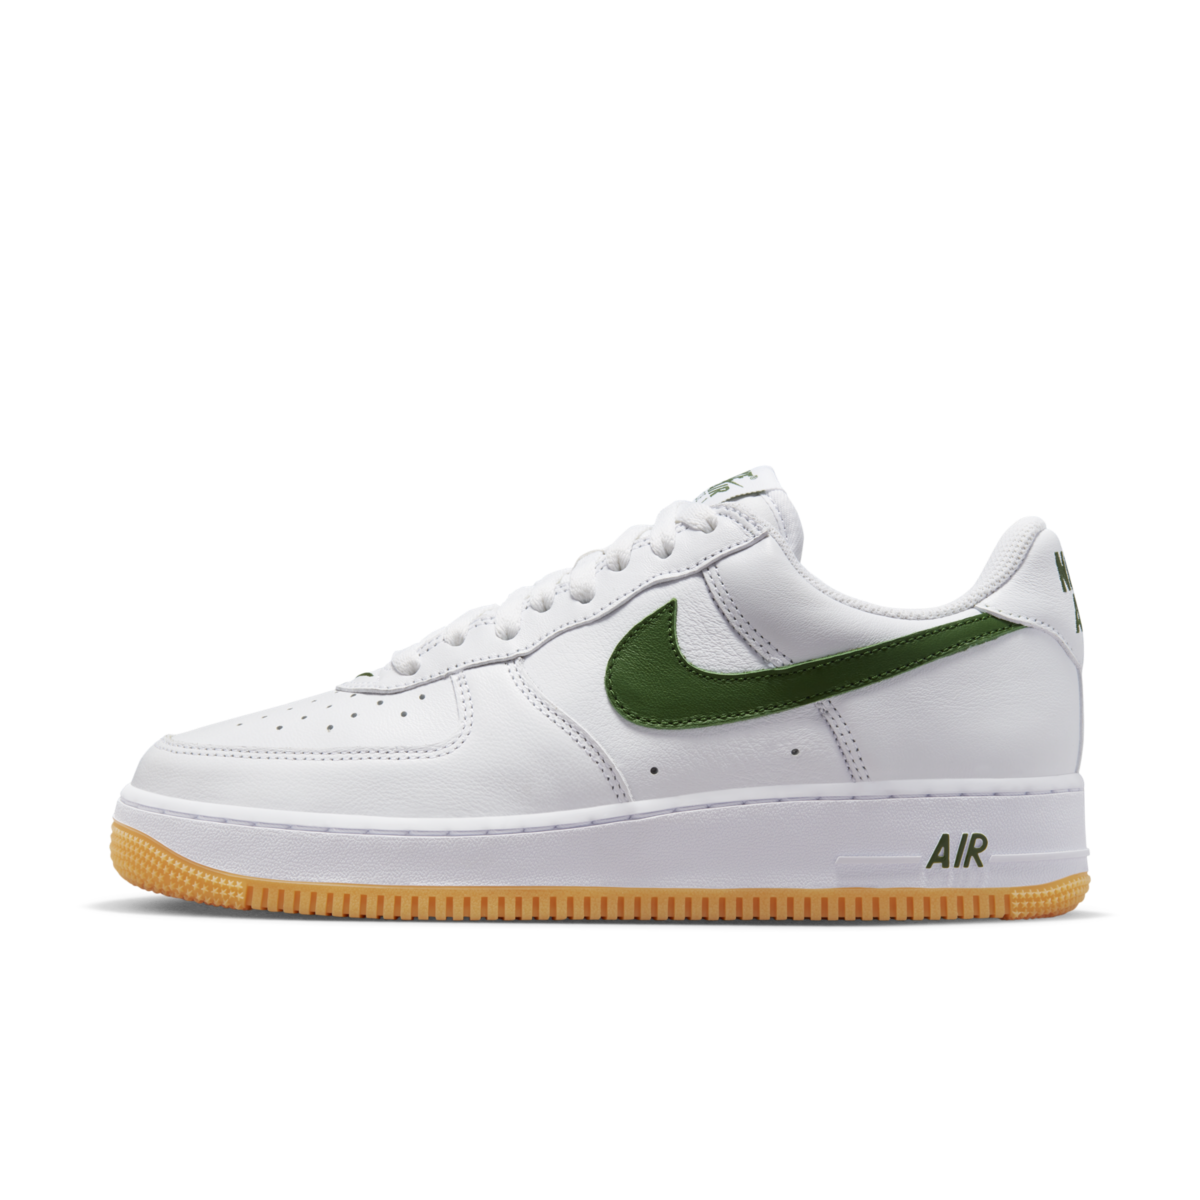 Nike Air Force 1 Low 'Forest Green' - Color of the Month